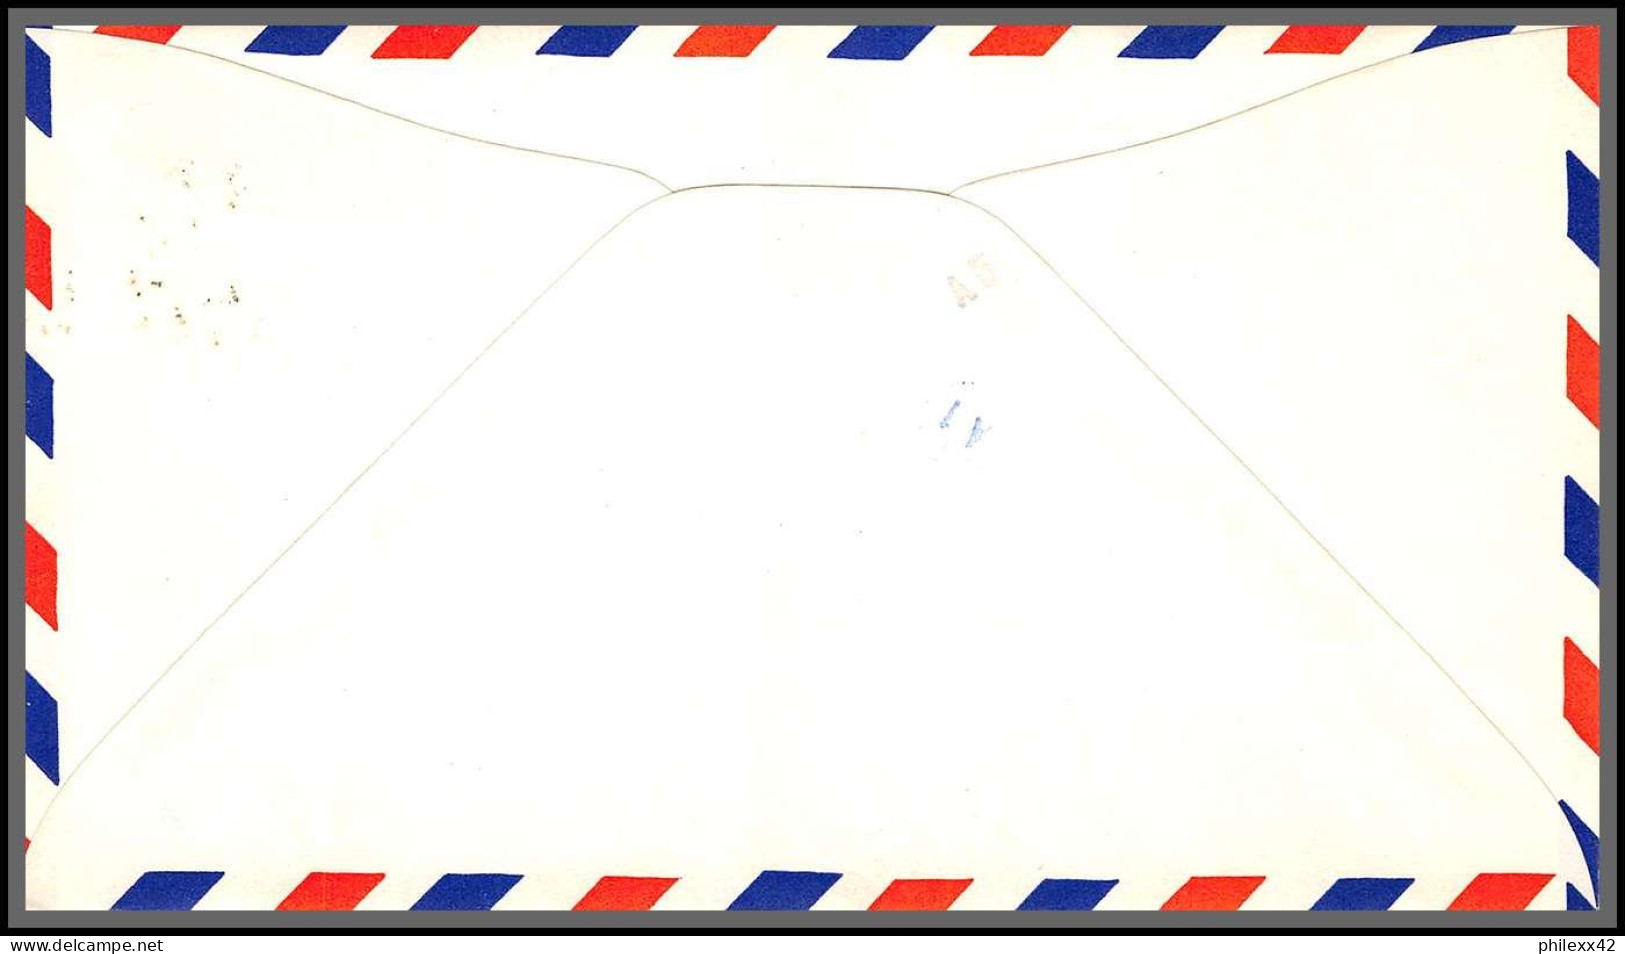 12380 Airport Dedication Boone 22/6/1960 Premier Vol First Flight Lettre Airmail Cover Usa Aviation - 2c. 1941-1960 Lettres